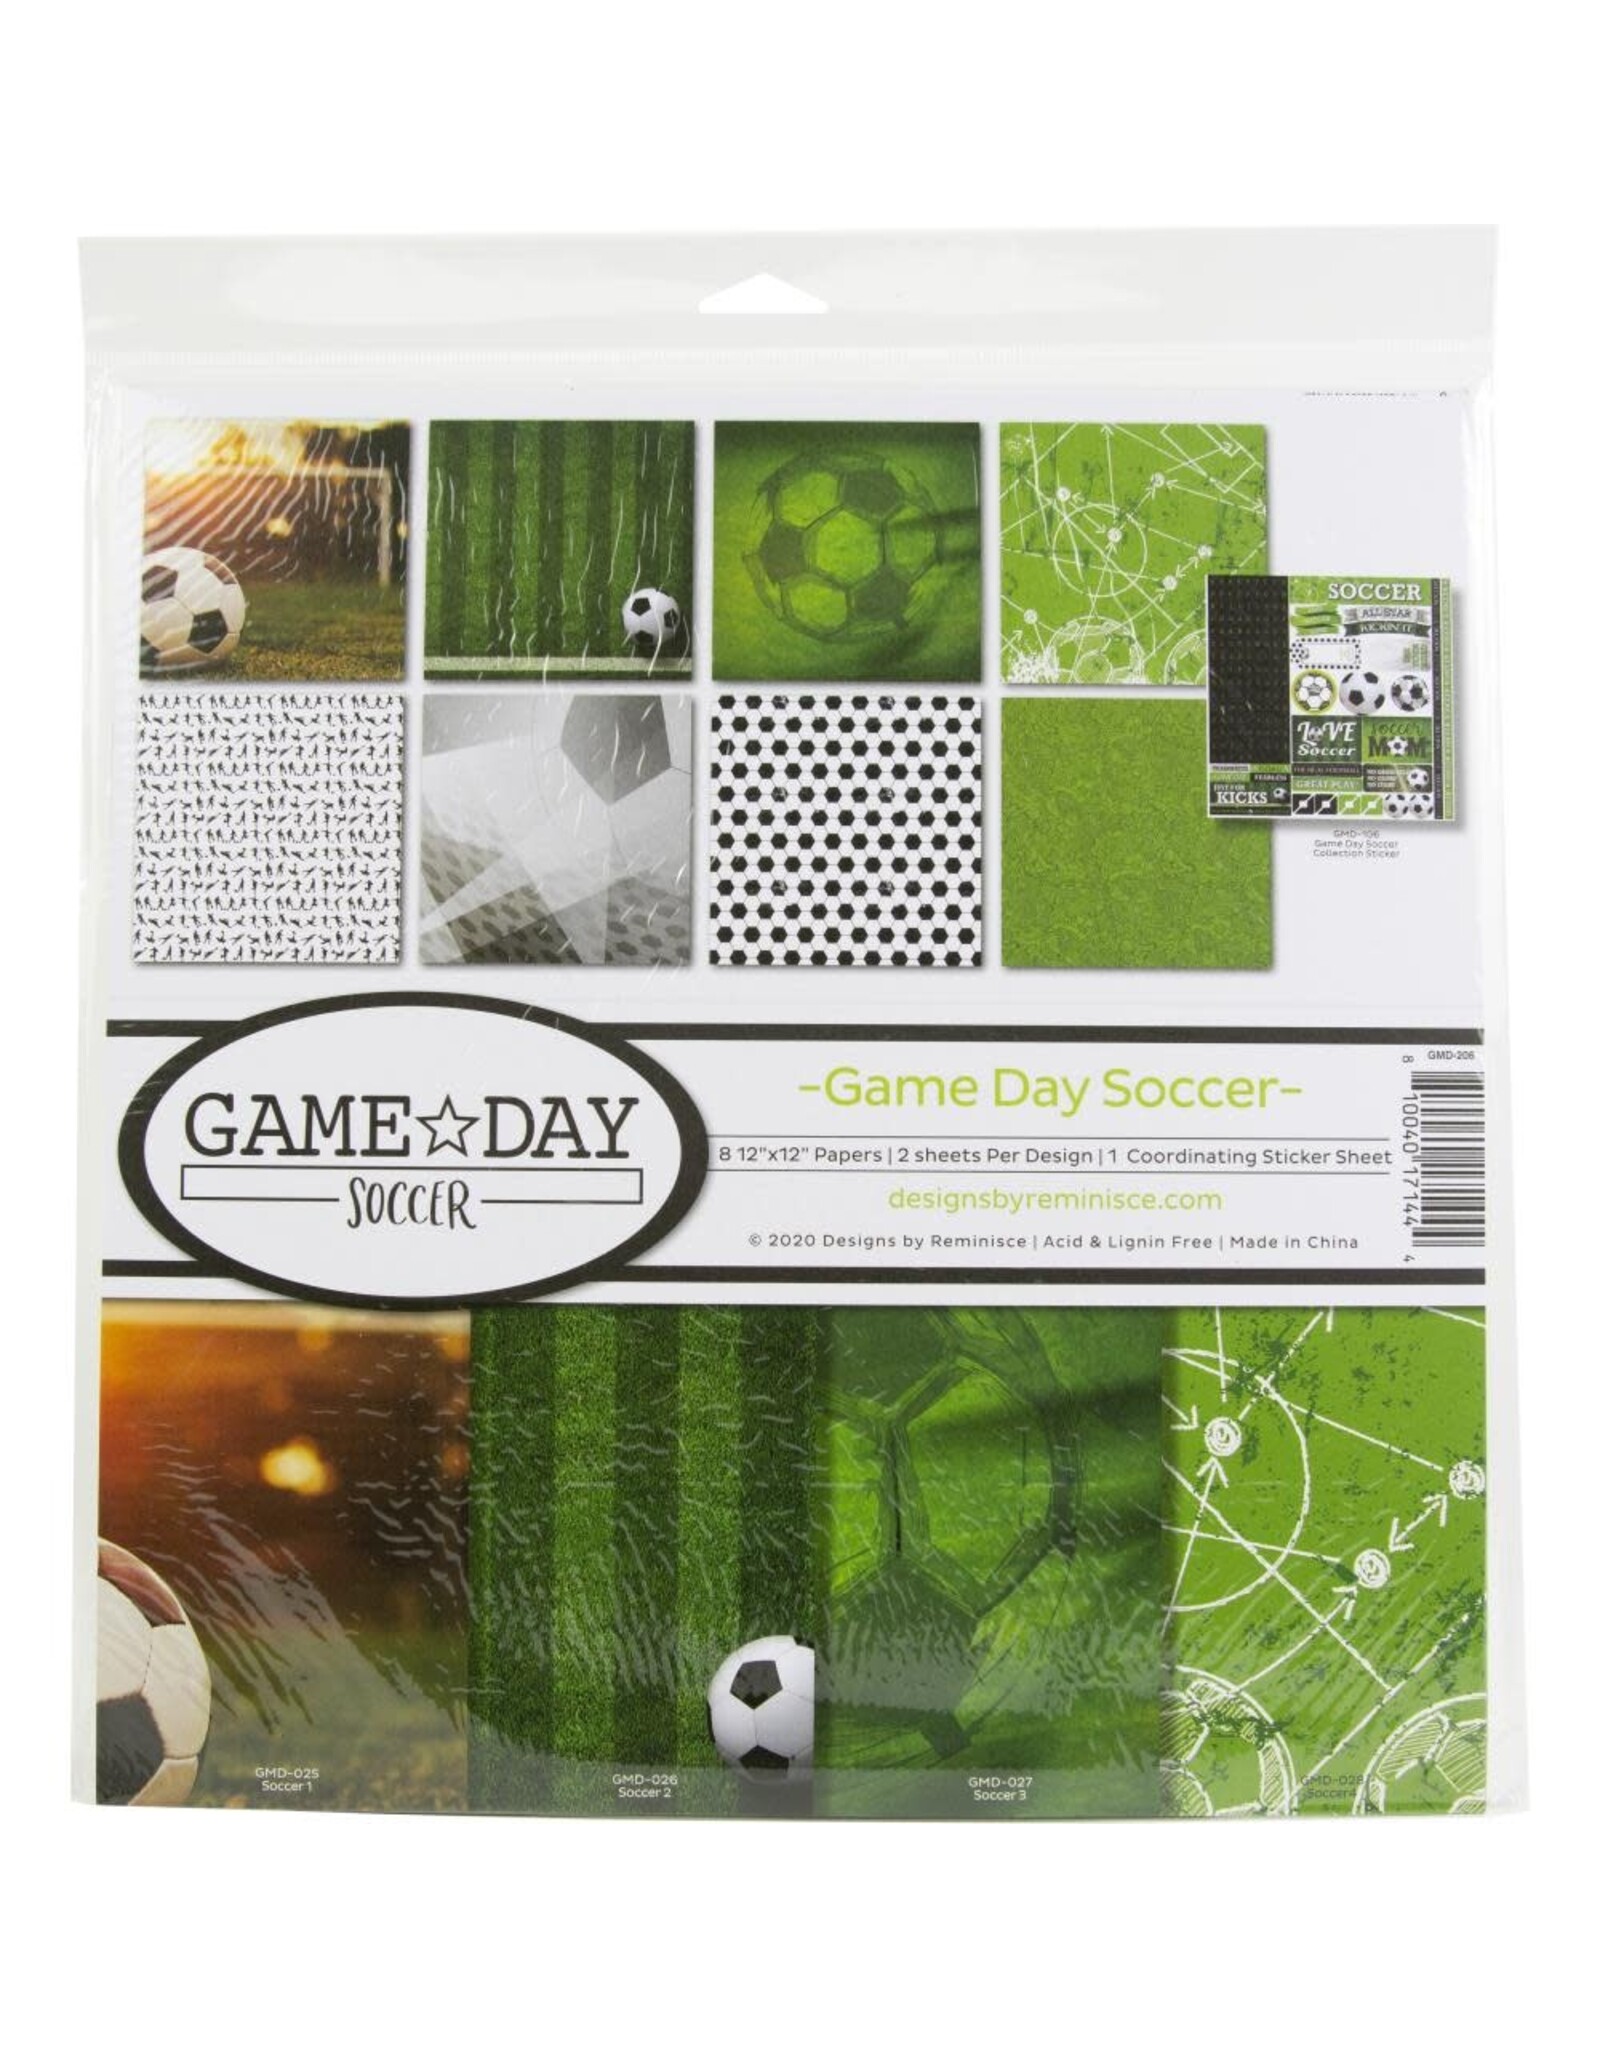 REMINISCE REMINISCE GAME DAY SOCCER 12x12 COLLECTION KIT